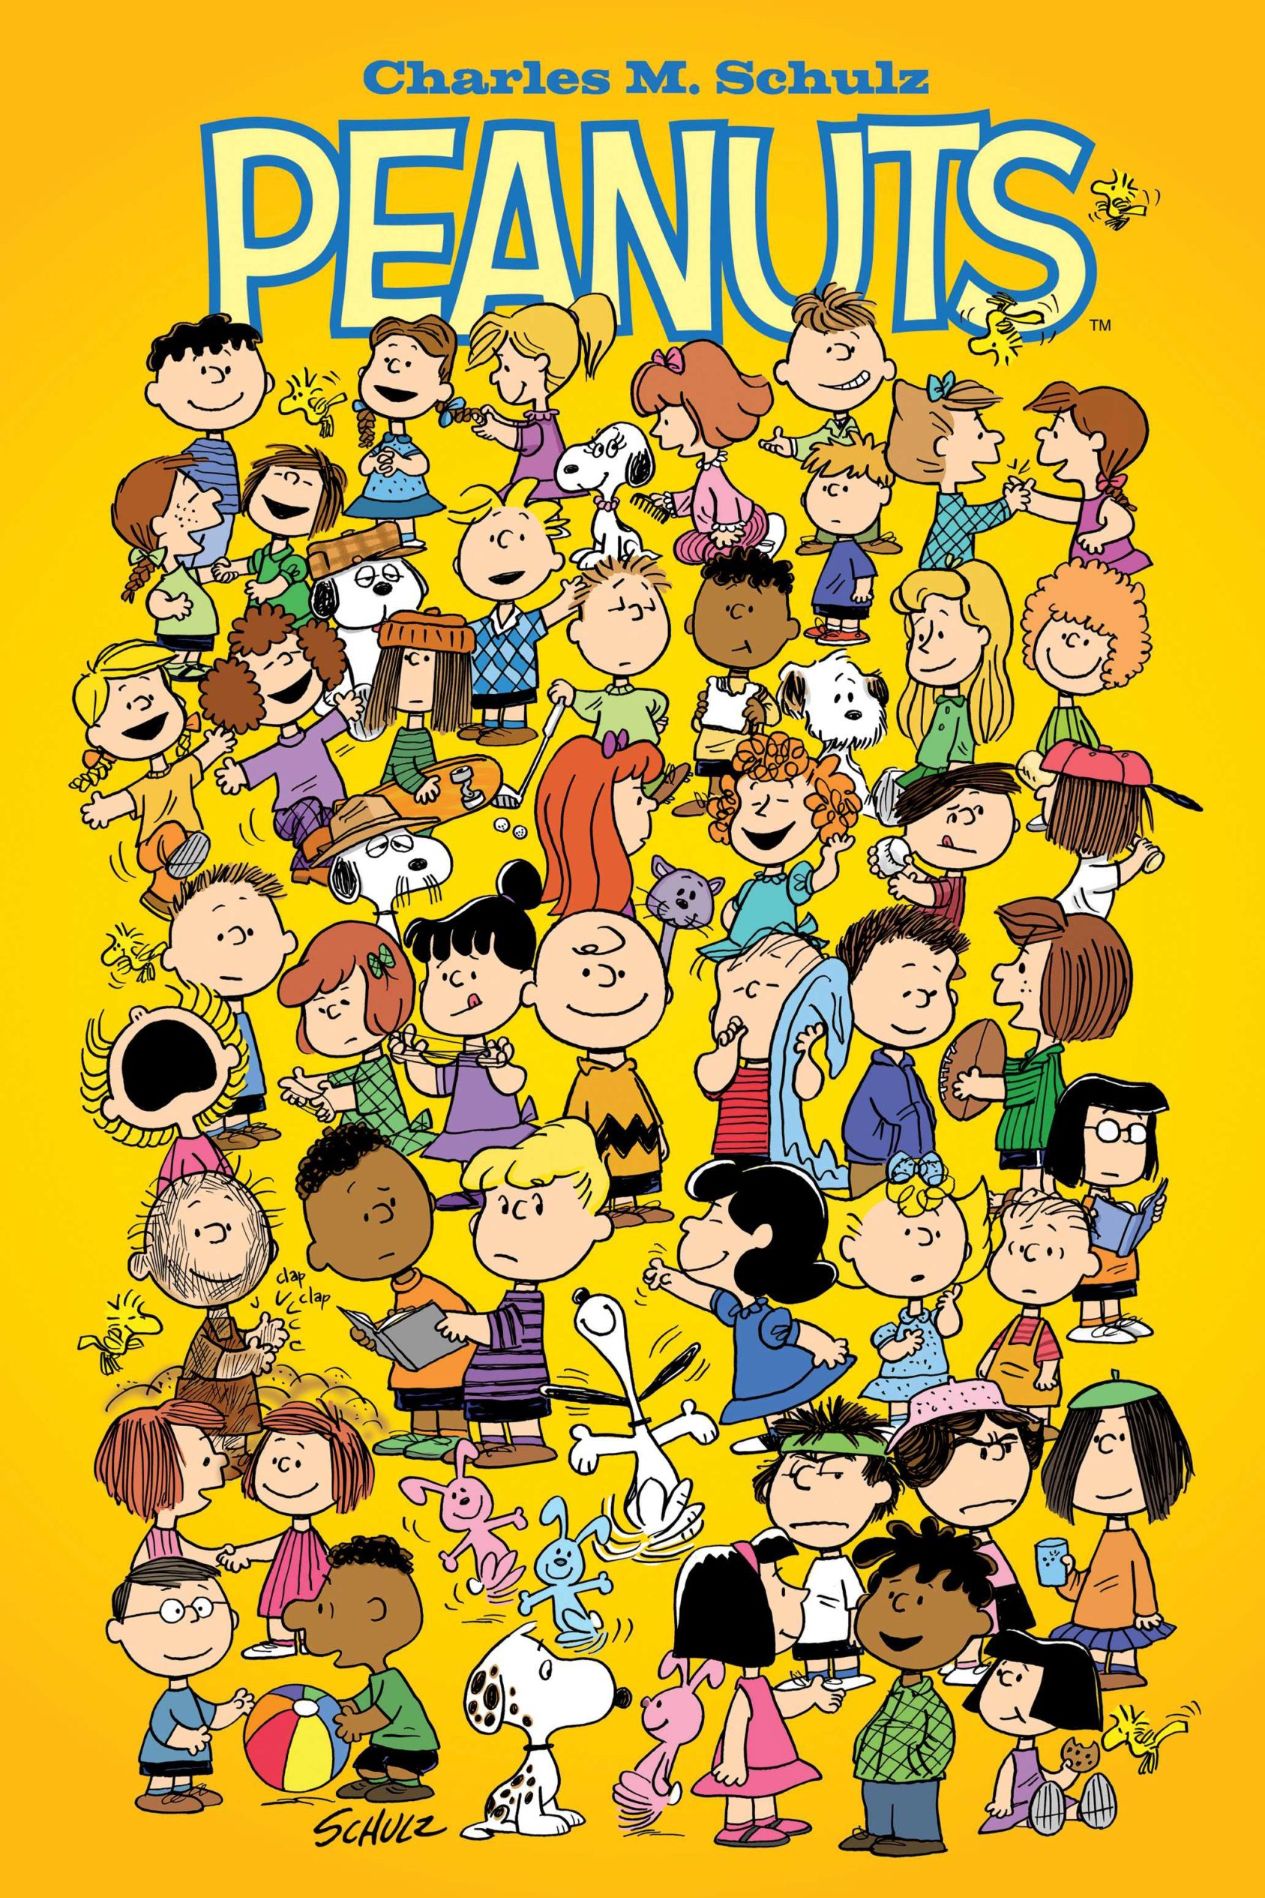 New Peanuts Movie: Confirmation, Story & Everything We Know